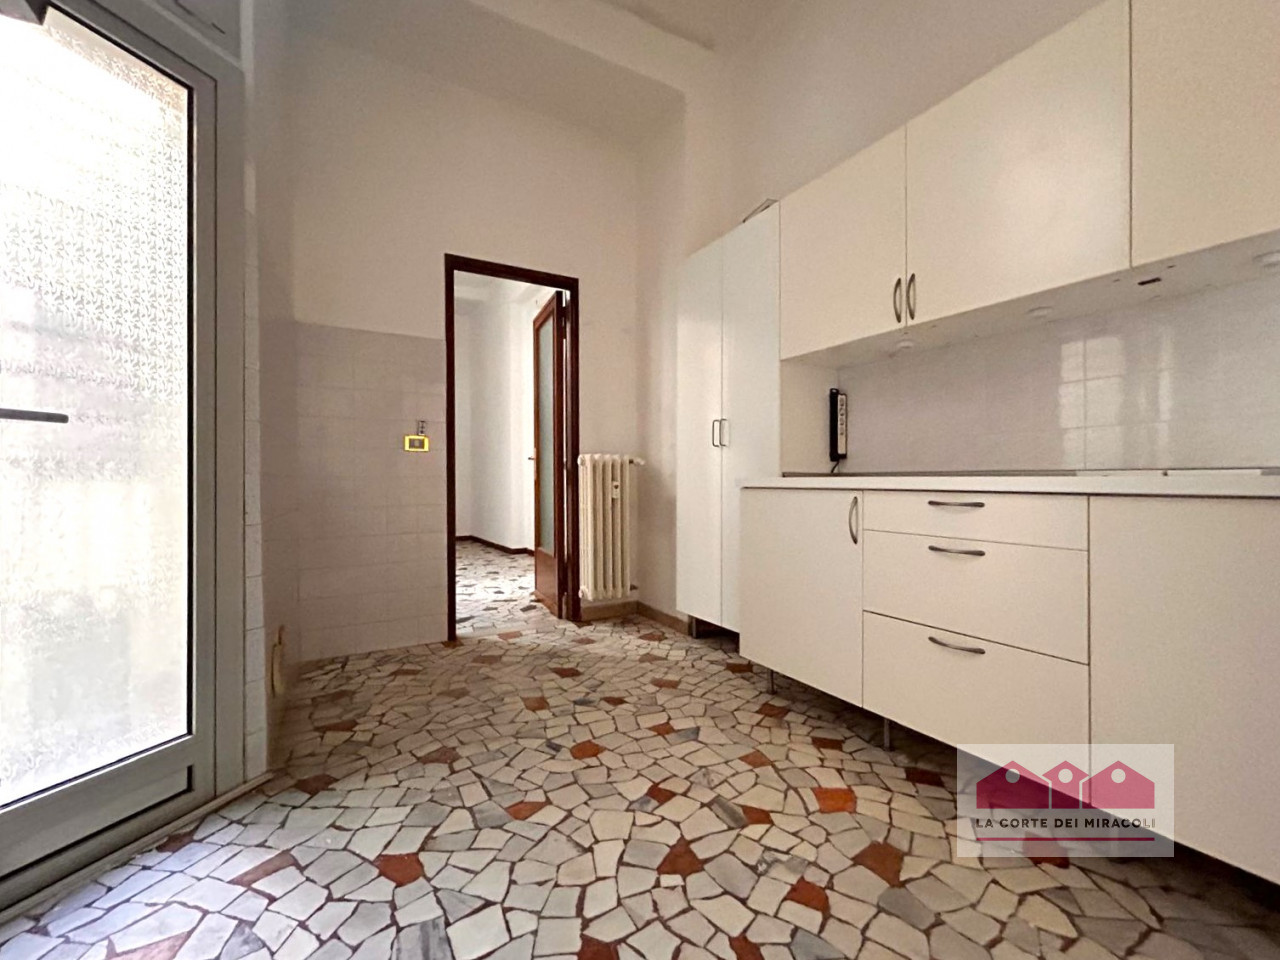 WIDE 3 BEDROOM + STUDY ROOM IN THE HEART OF HISTORICAL CENTER